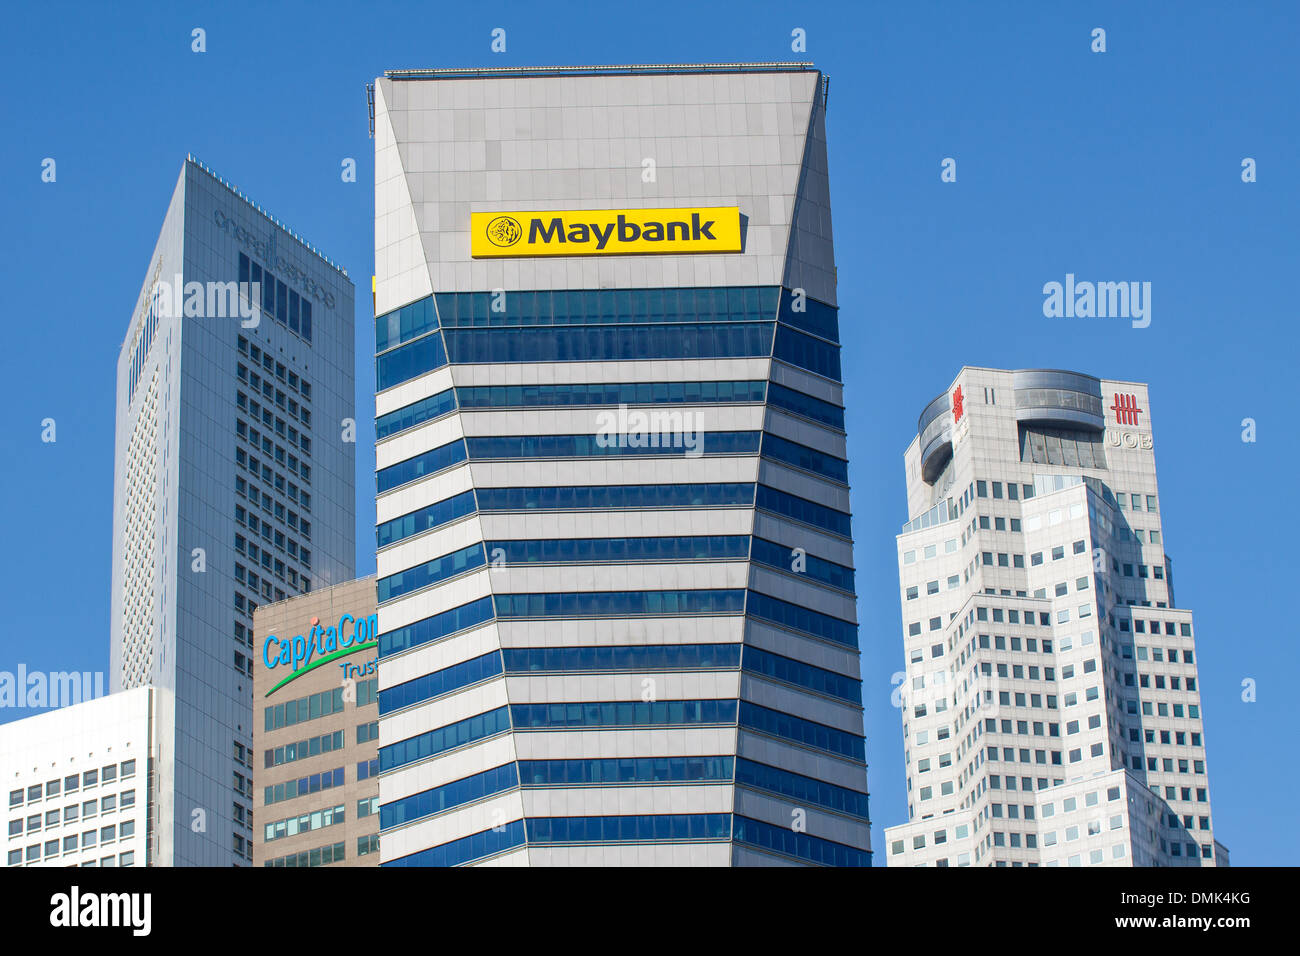 HEADQUARTERS OF THE MALAYSIAN BANK MAYBANK AND OFFICE BUILDINGS IN THE FINANCIAL DISTRICT, CENTRAL BUSINESS DISTRICT, SINGAPORE Stock Photo